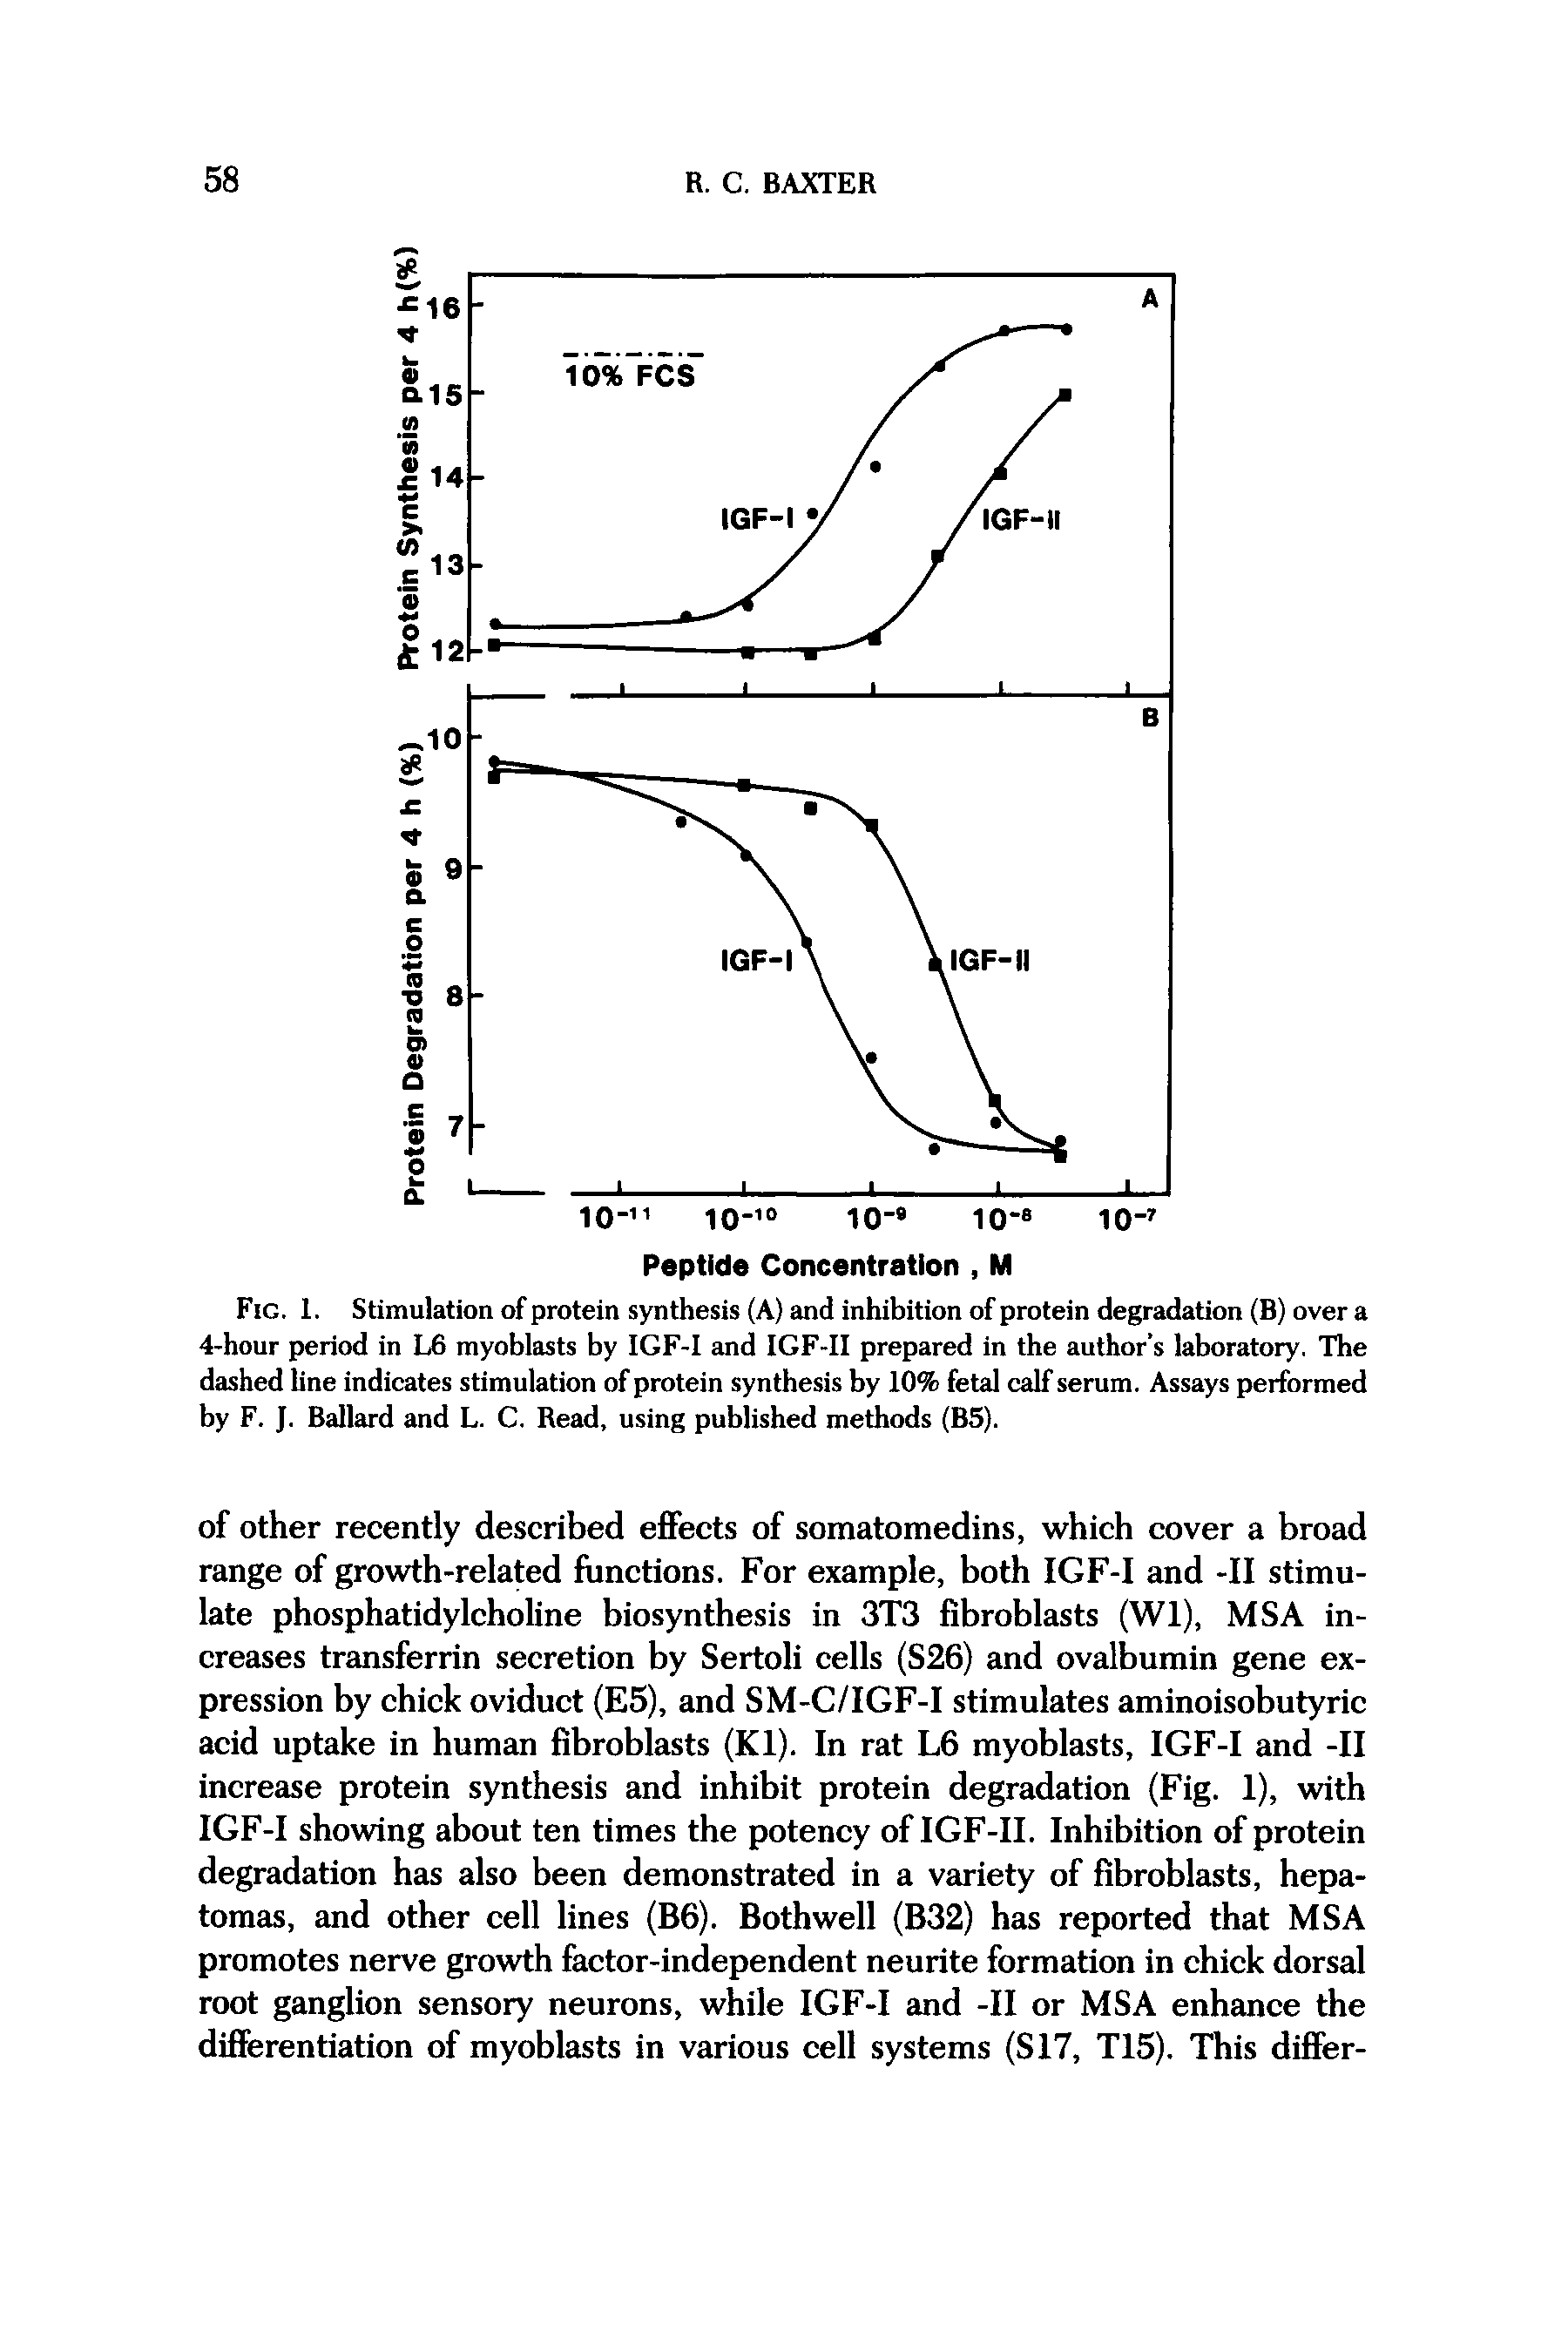 Fig. 1. Stimulation of protein synthesis (A) and inhibition of protein degradation (B) over a 4-hour period in L6 myoblasts by IGF-I and IGF-II prepared in the author s laboratory. The dashed hne indicates stimulation of protein synthesis by 10% fetal calf serum. Assays performed by F. J. Ballard and L. C. Read, using published methods (B5).